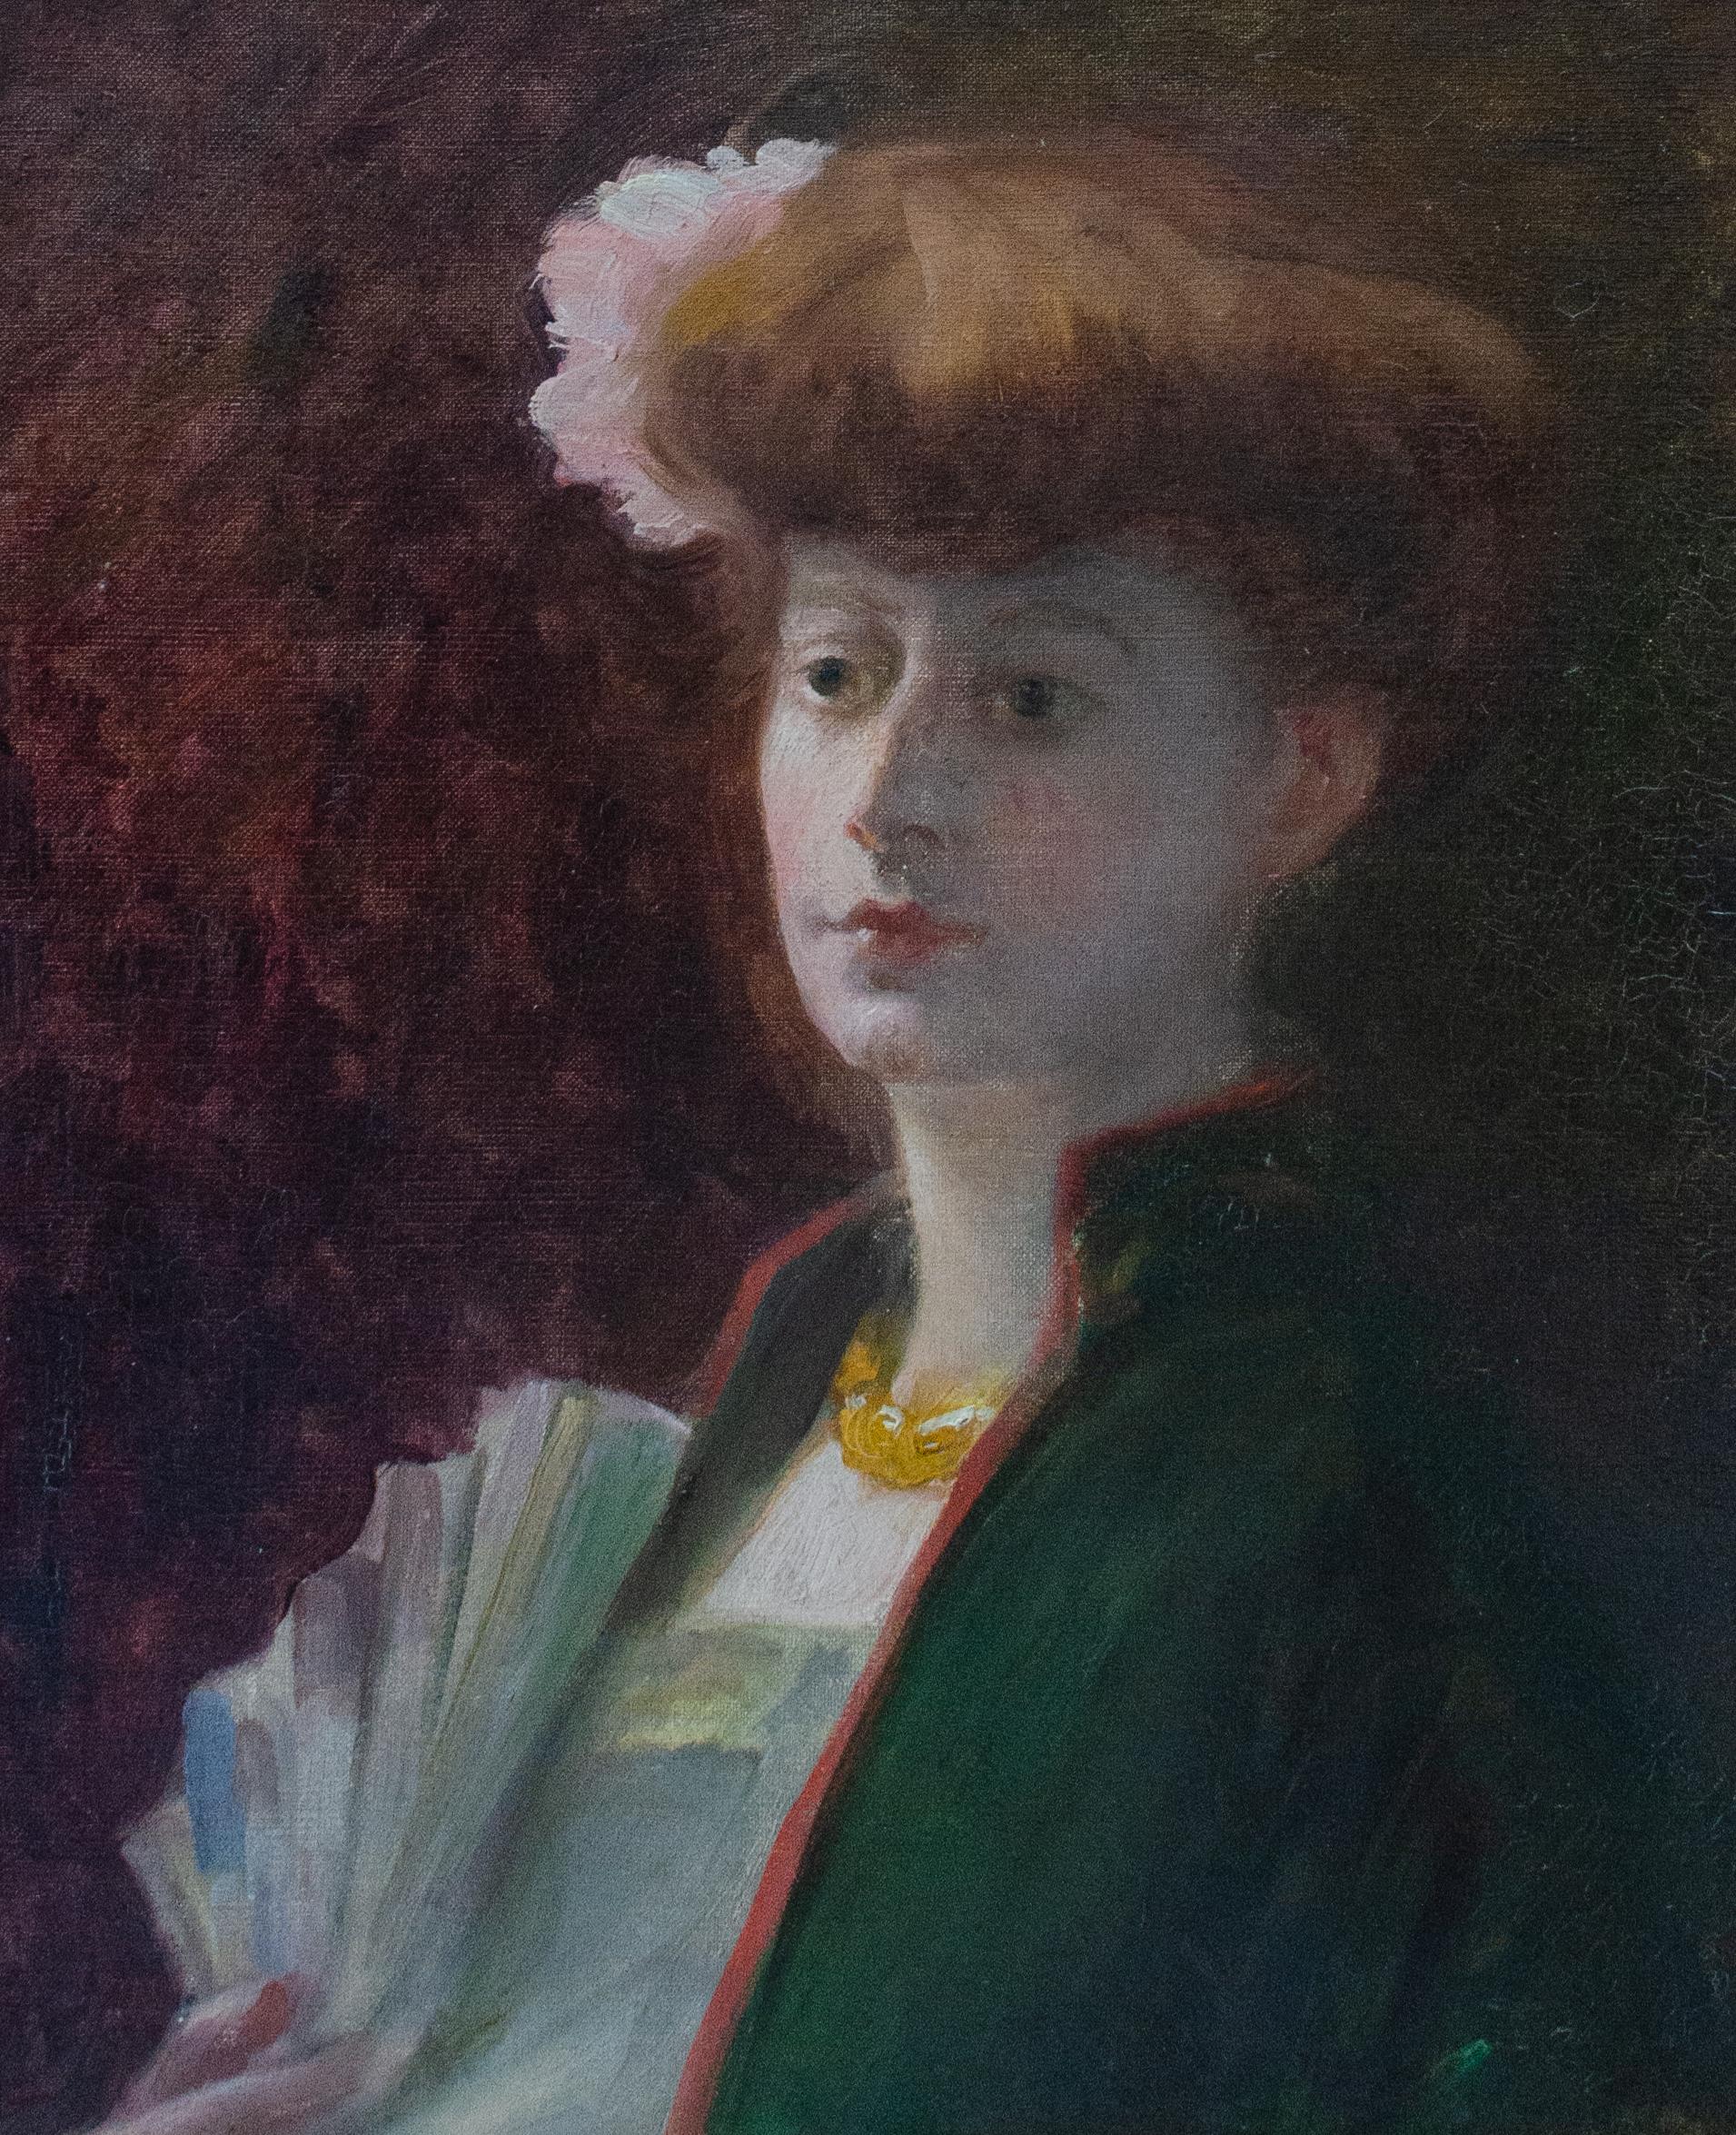 Lilla Cabot Perry
Portrait of Lady with Fan, circa 1890
Oil on canvas
18 x 15 inches

Born in Boston, Lilla Perry was a key person, along with Mary Cassatt, in bringing French Impressionism* to the United States from France.  For many years, she